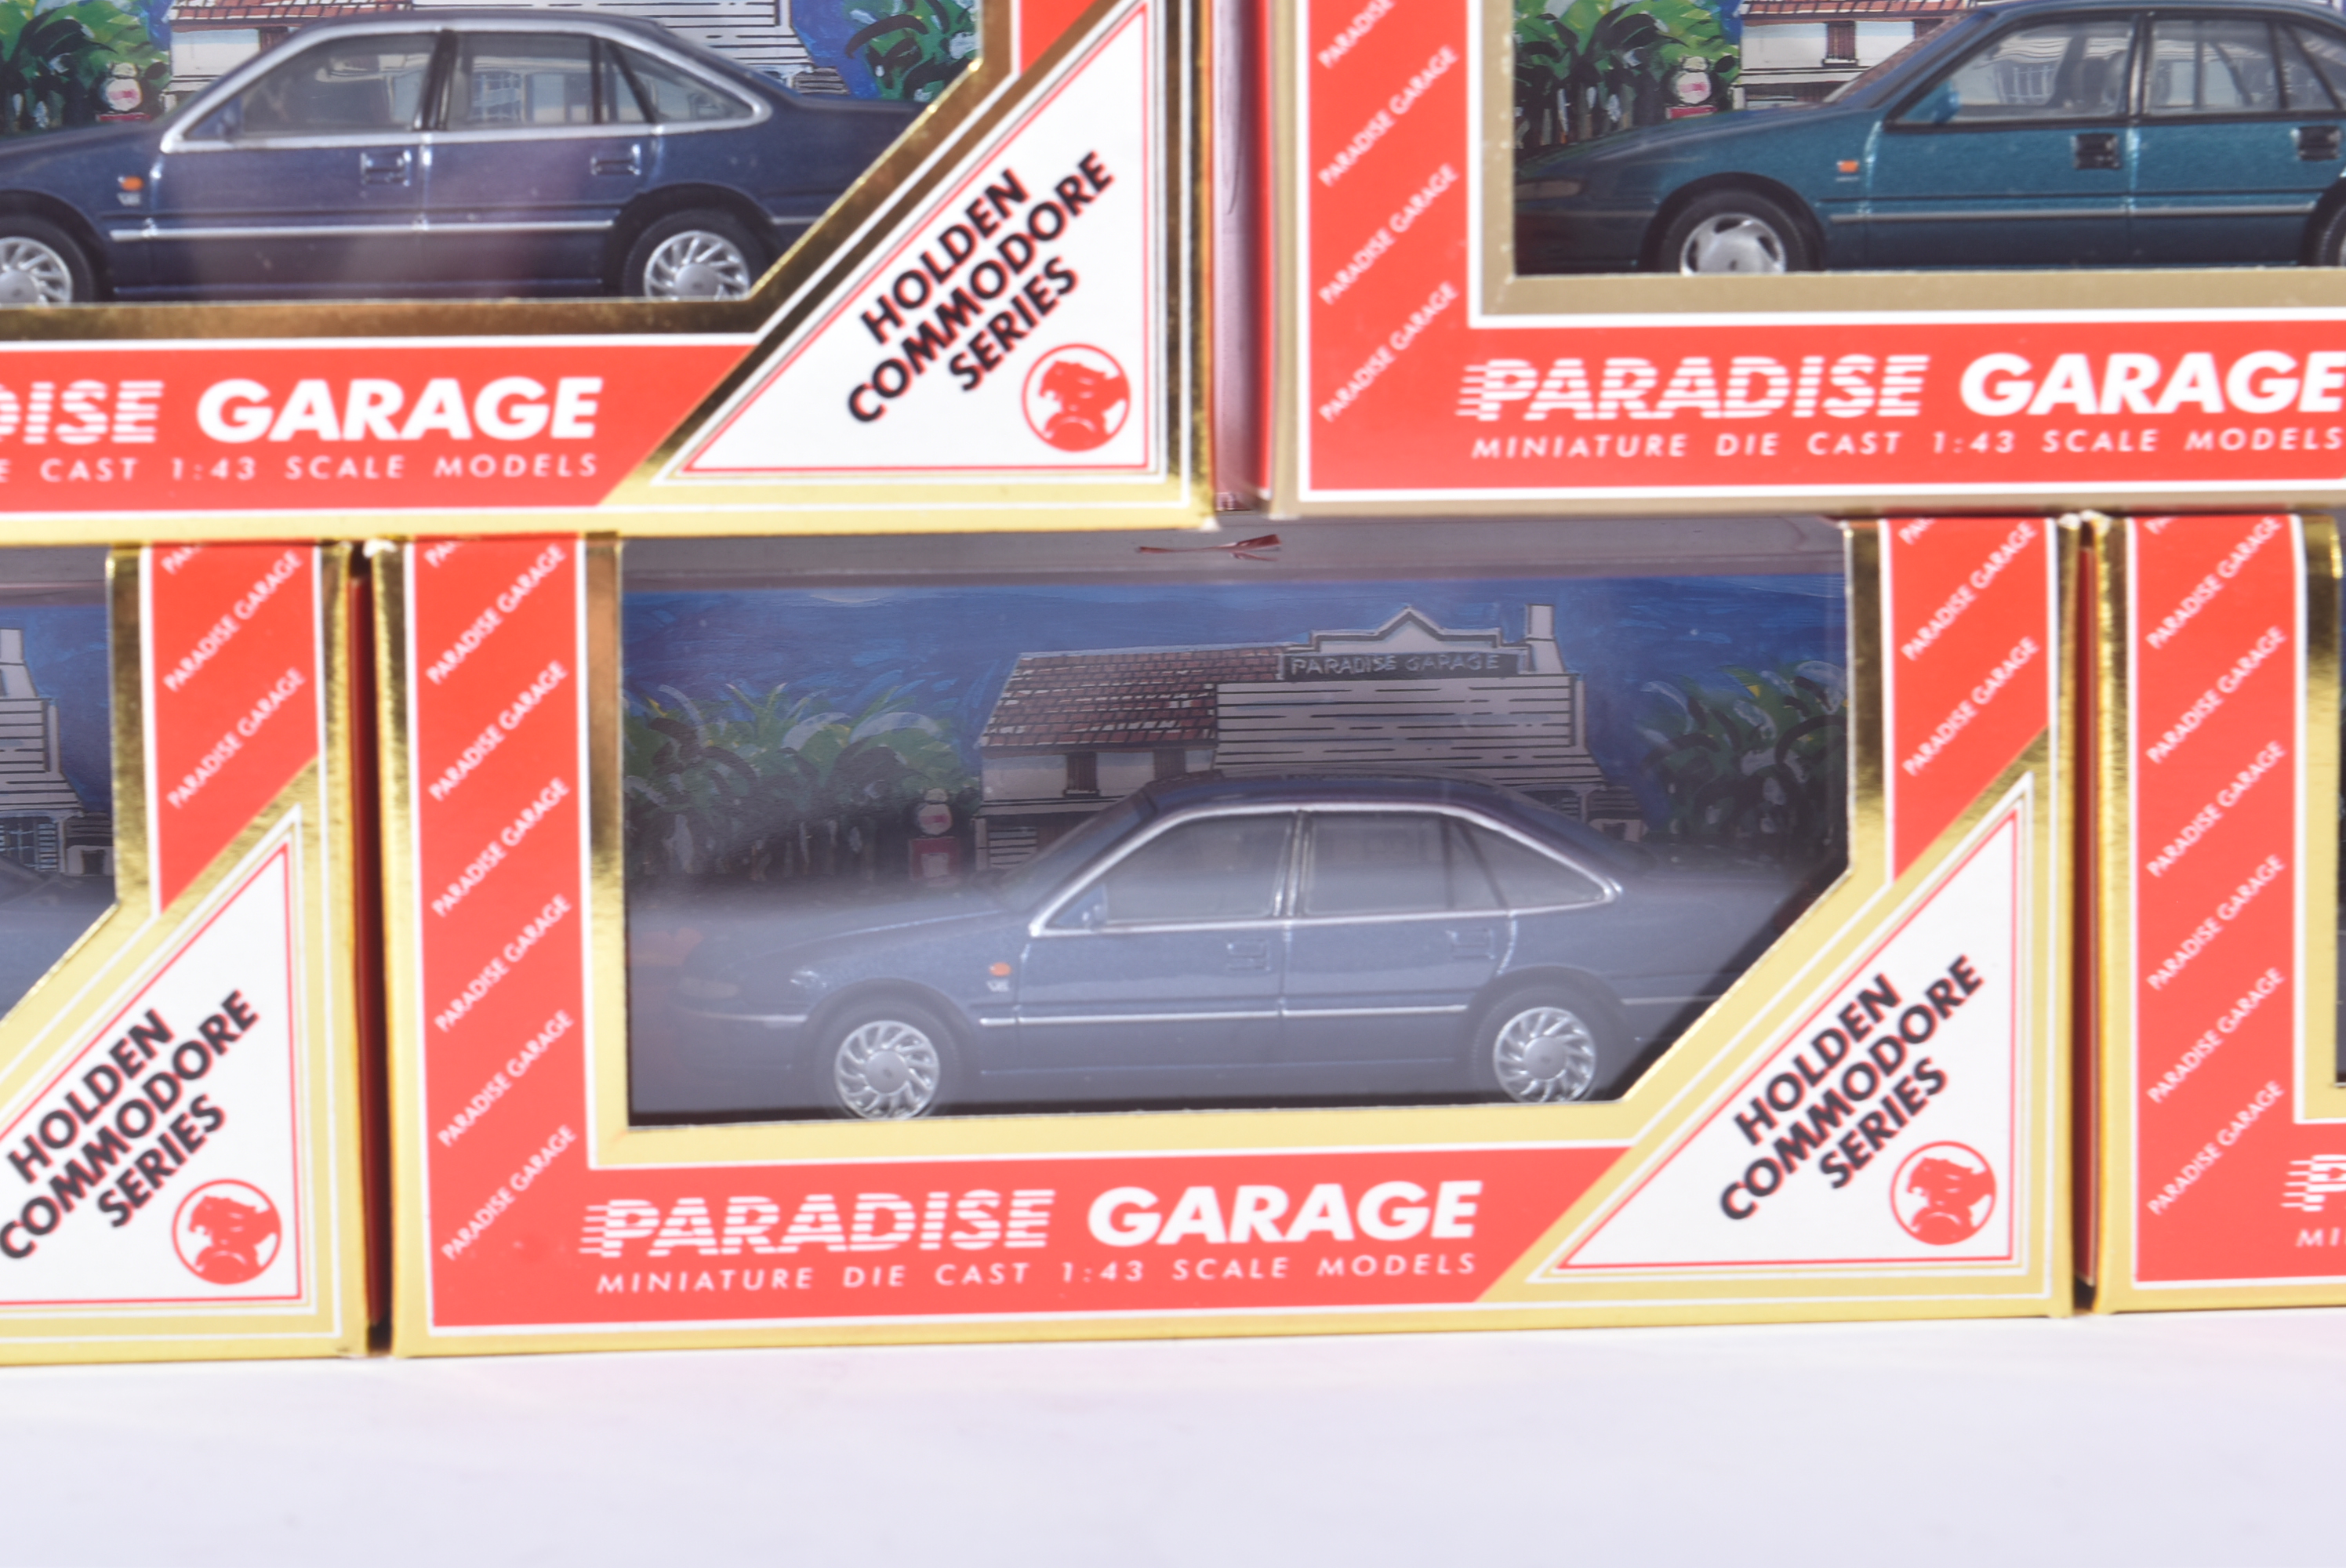 PARADISE GARAGE - 1/43 SCALE PRECISION DIECAST MODELS - Image 3 of 6